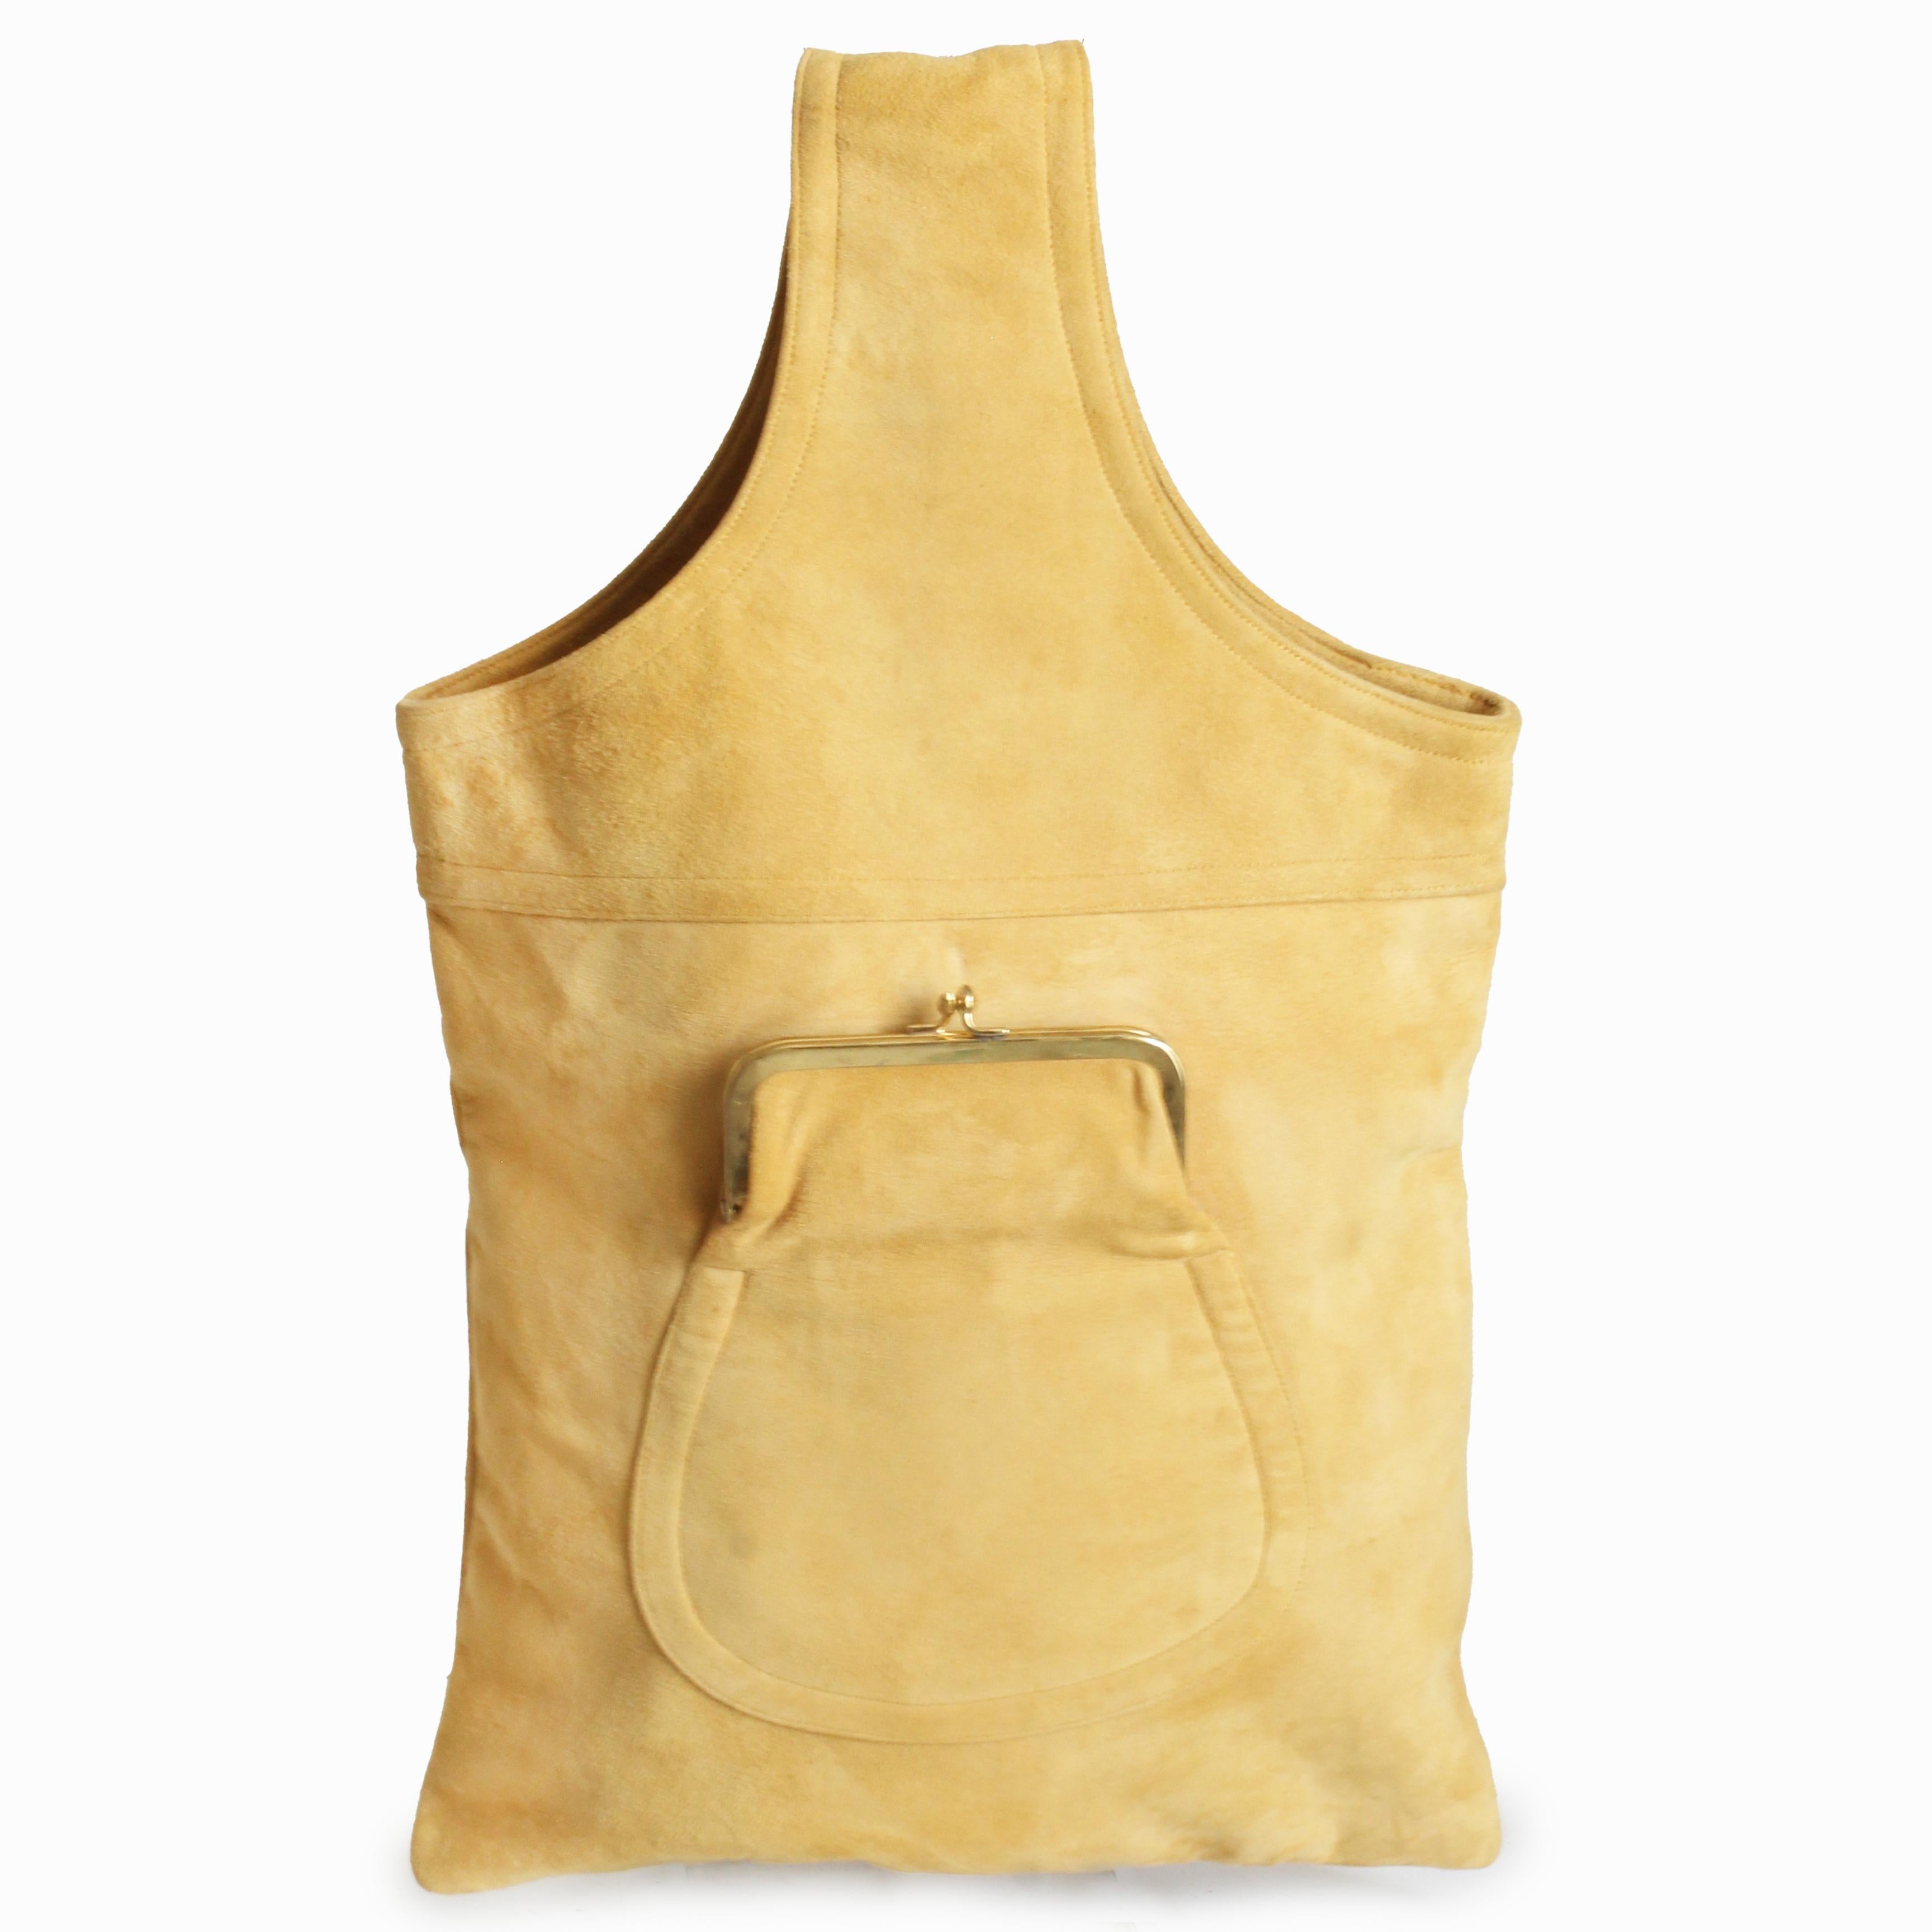 Preowned, vintage Bonnie Cashin sling bag, from her 'Cashin Carry' collection of handbags and accessories, likely made in the 1960s.  Made from a supple butter creme hued suede, this fabulous tote bag features a kiss lock coin pocket in front that's